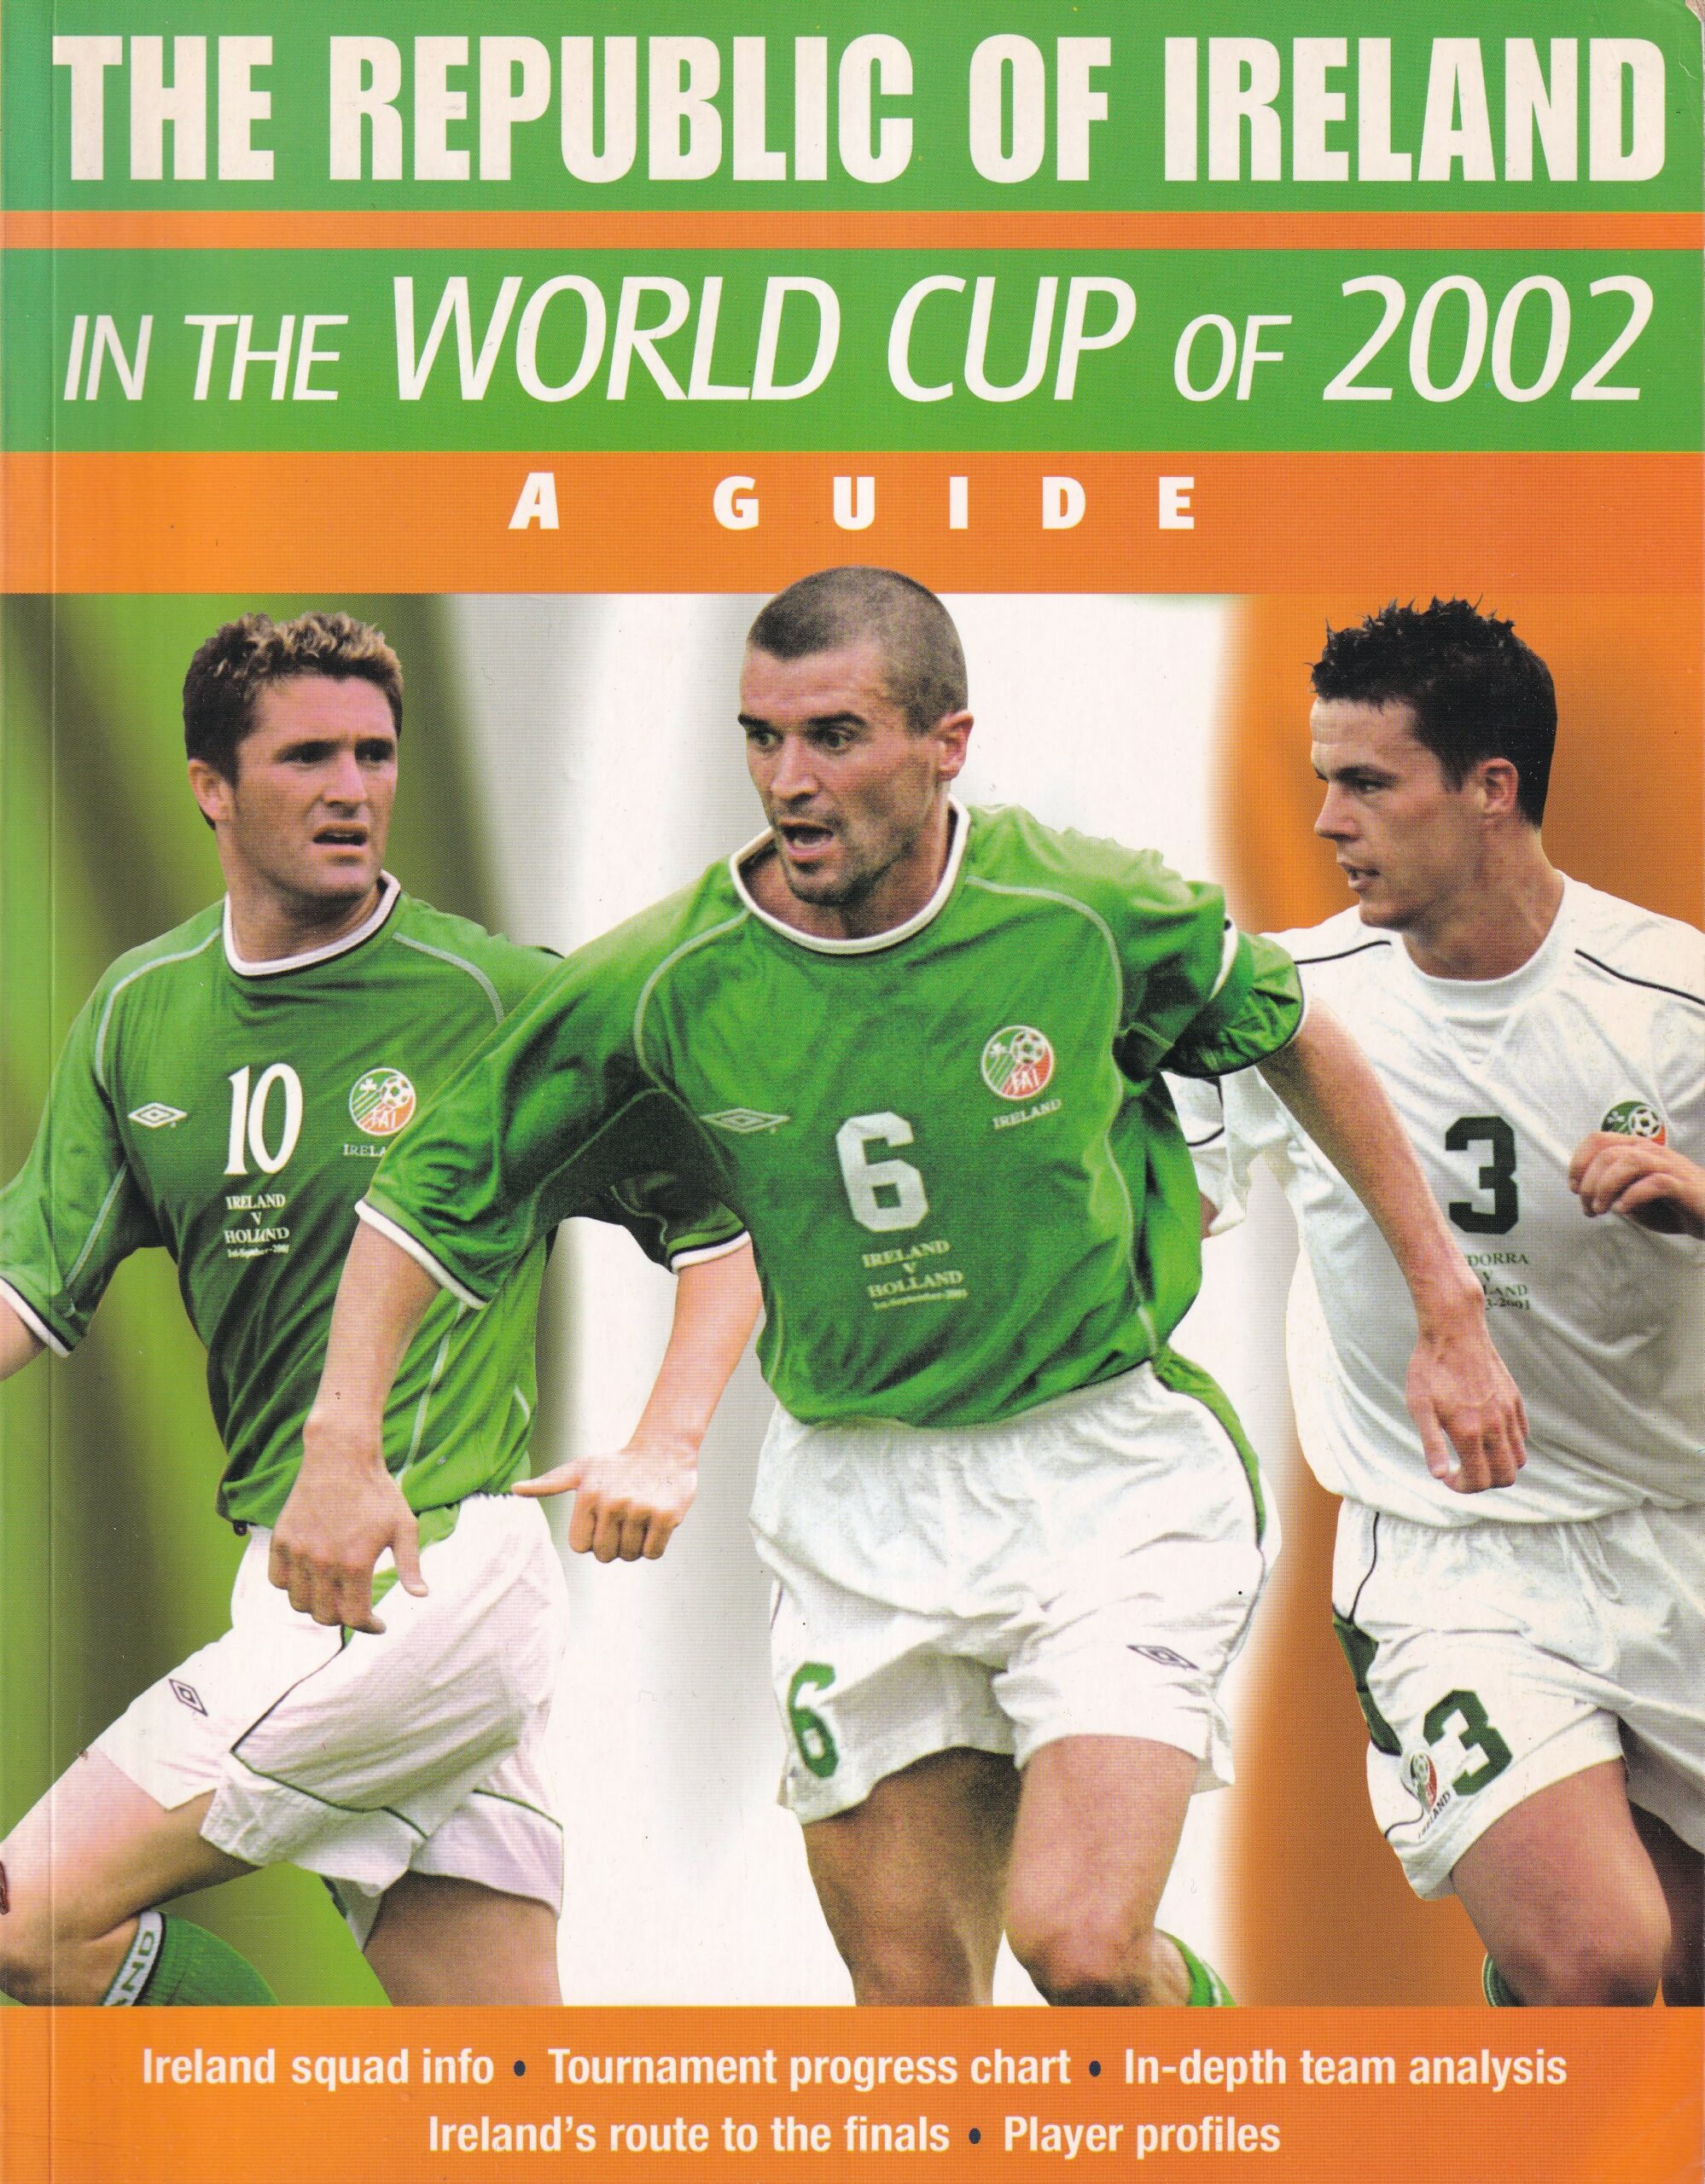 The Republic of Ireland in the World Cup of 2002: A Guide | Justyn Barnes and Aubrey Ganguly (eds.) | Charlie Byrne's